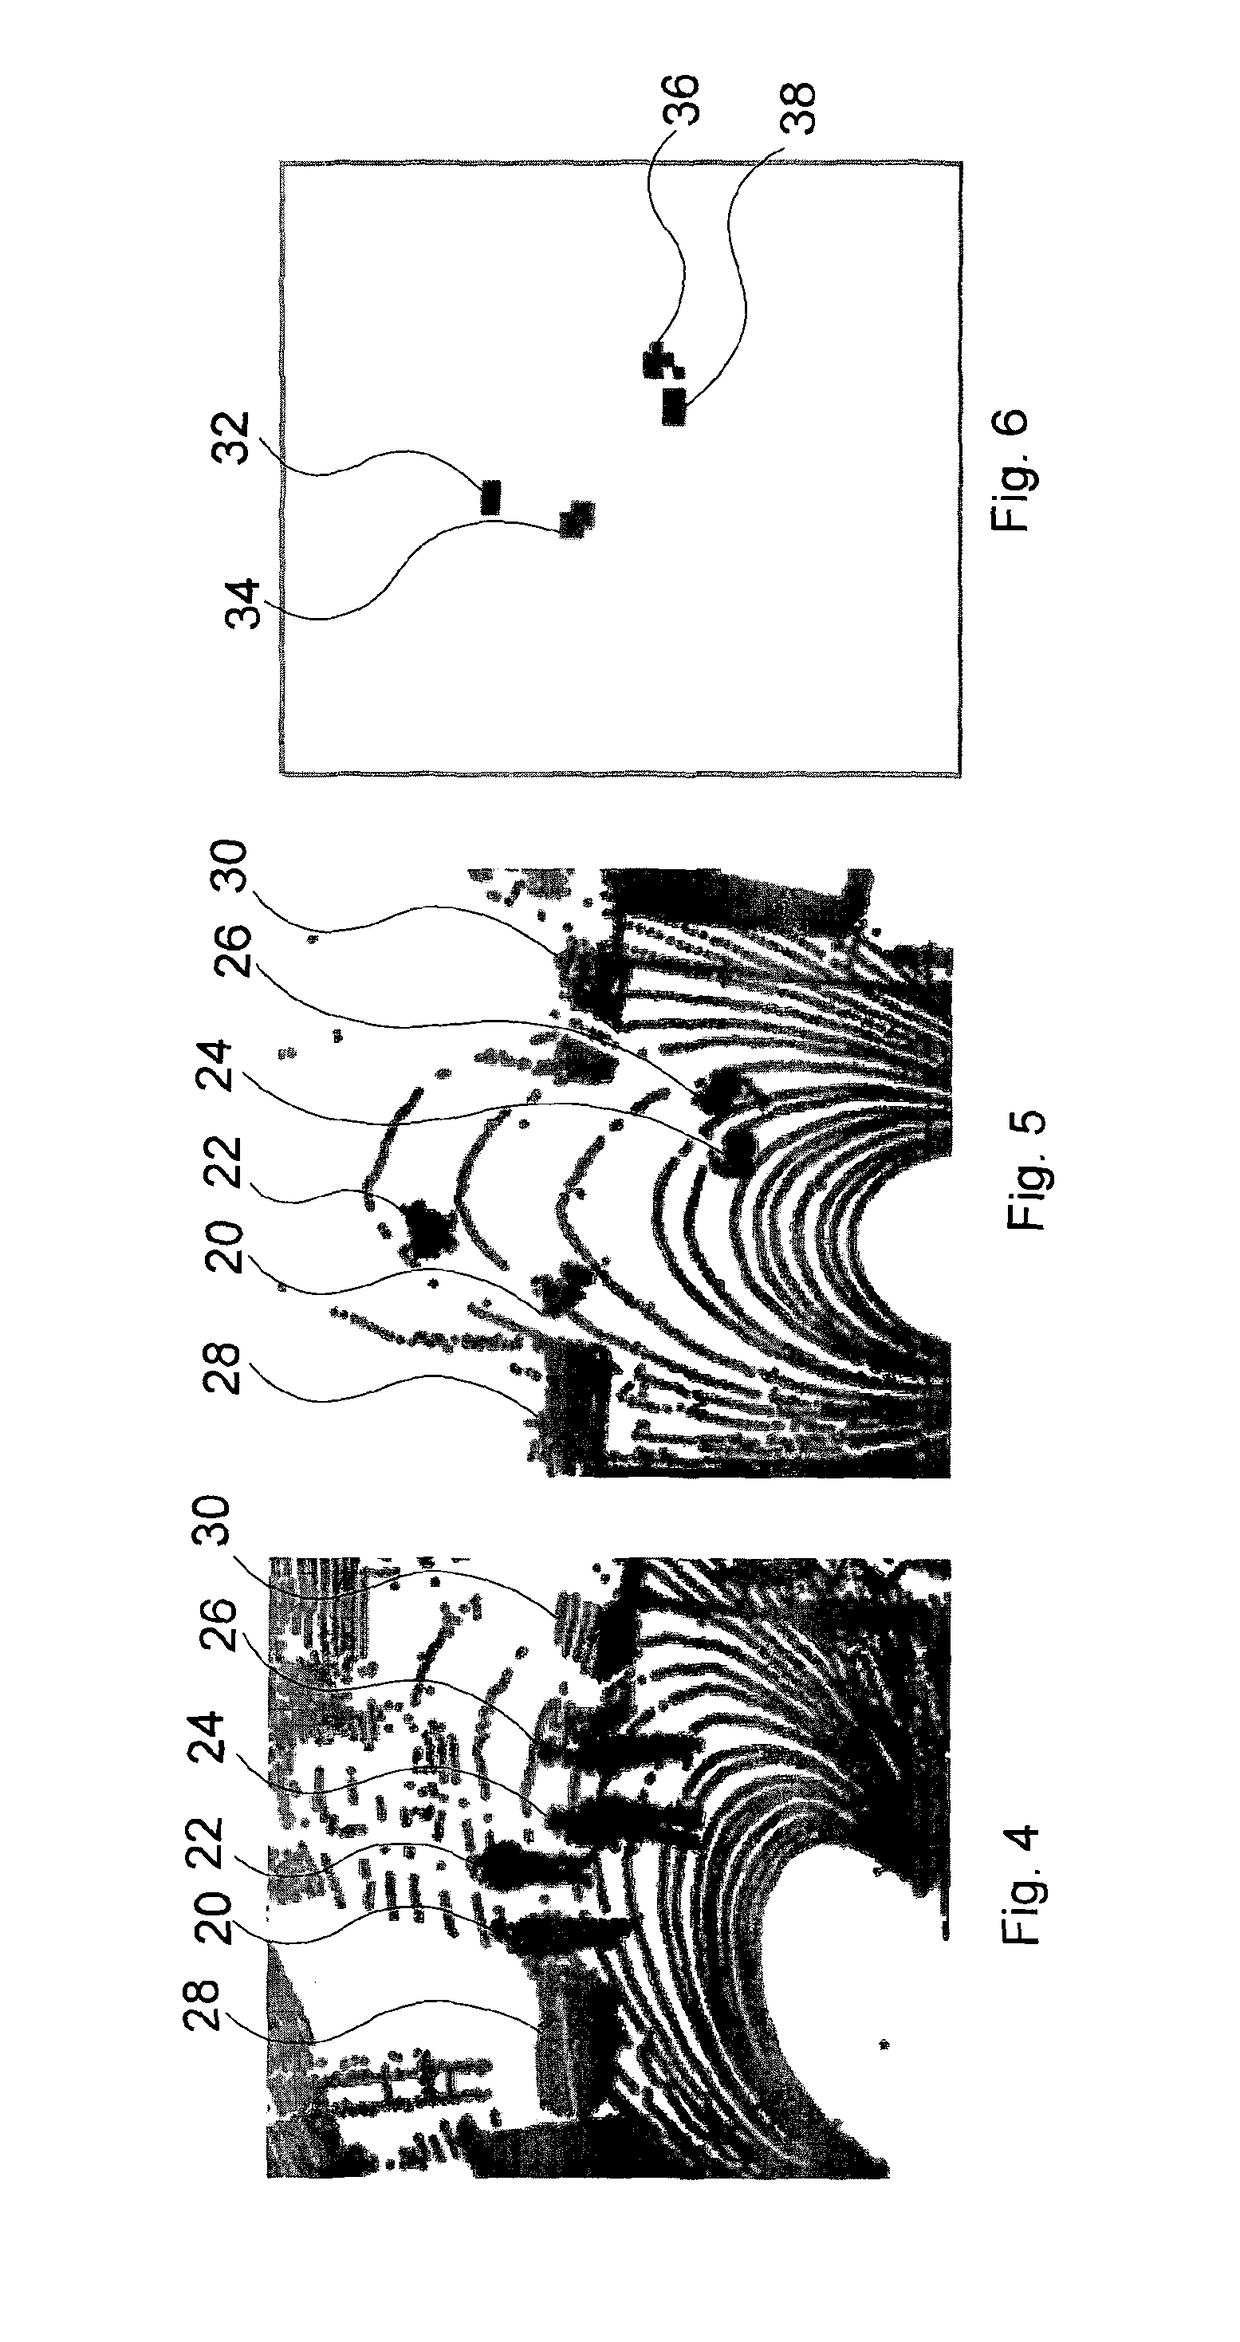 Method and system for generating a three-dimensional model